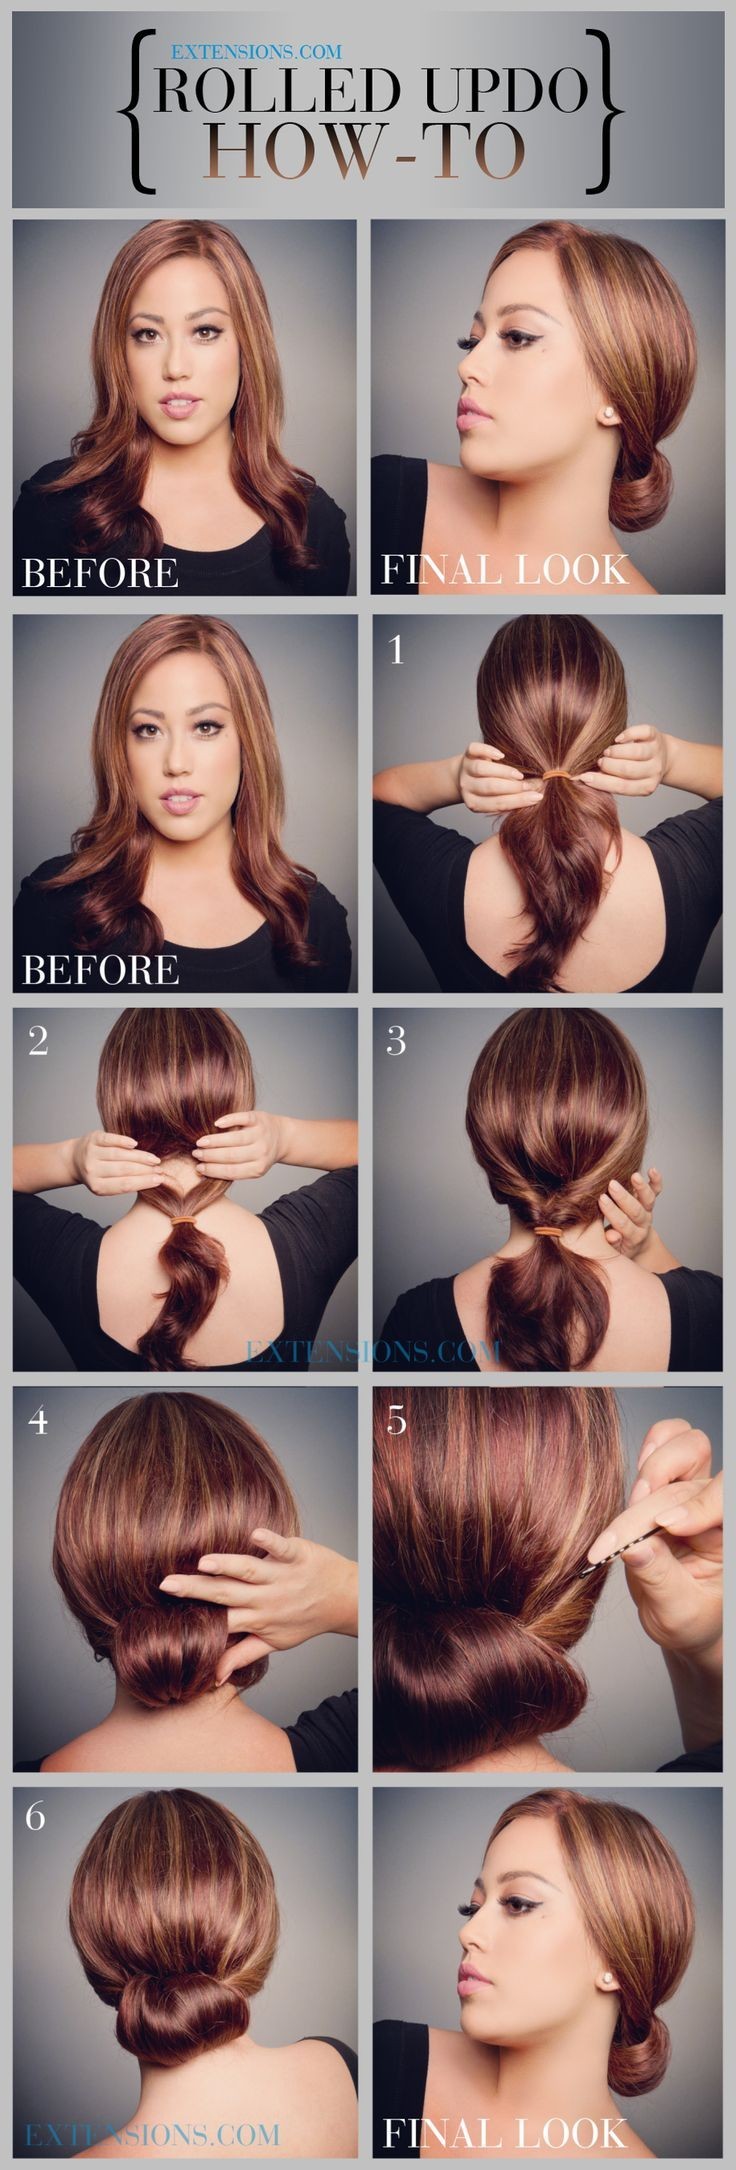 How to Do a Rolled Updo Hairstyle